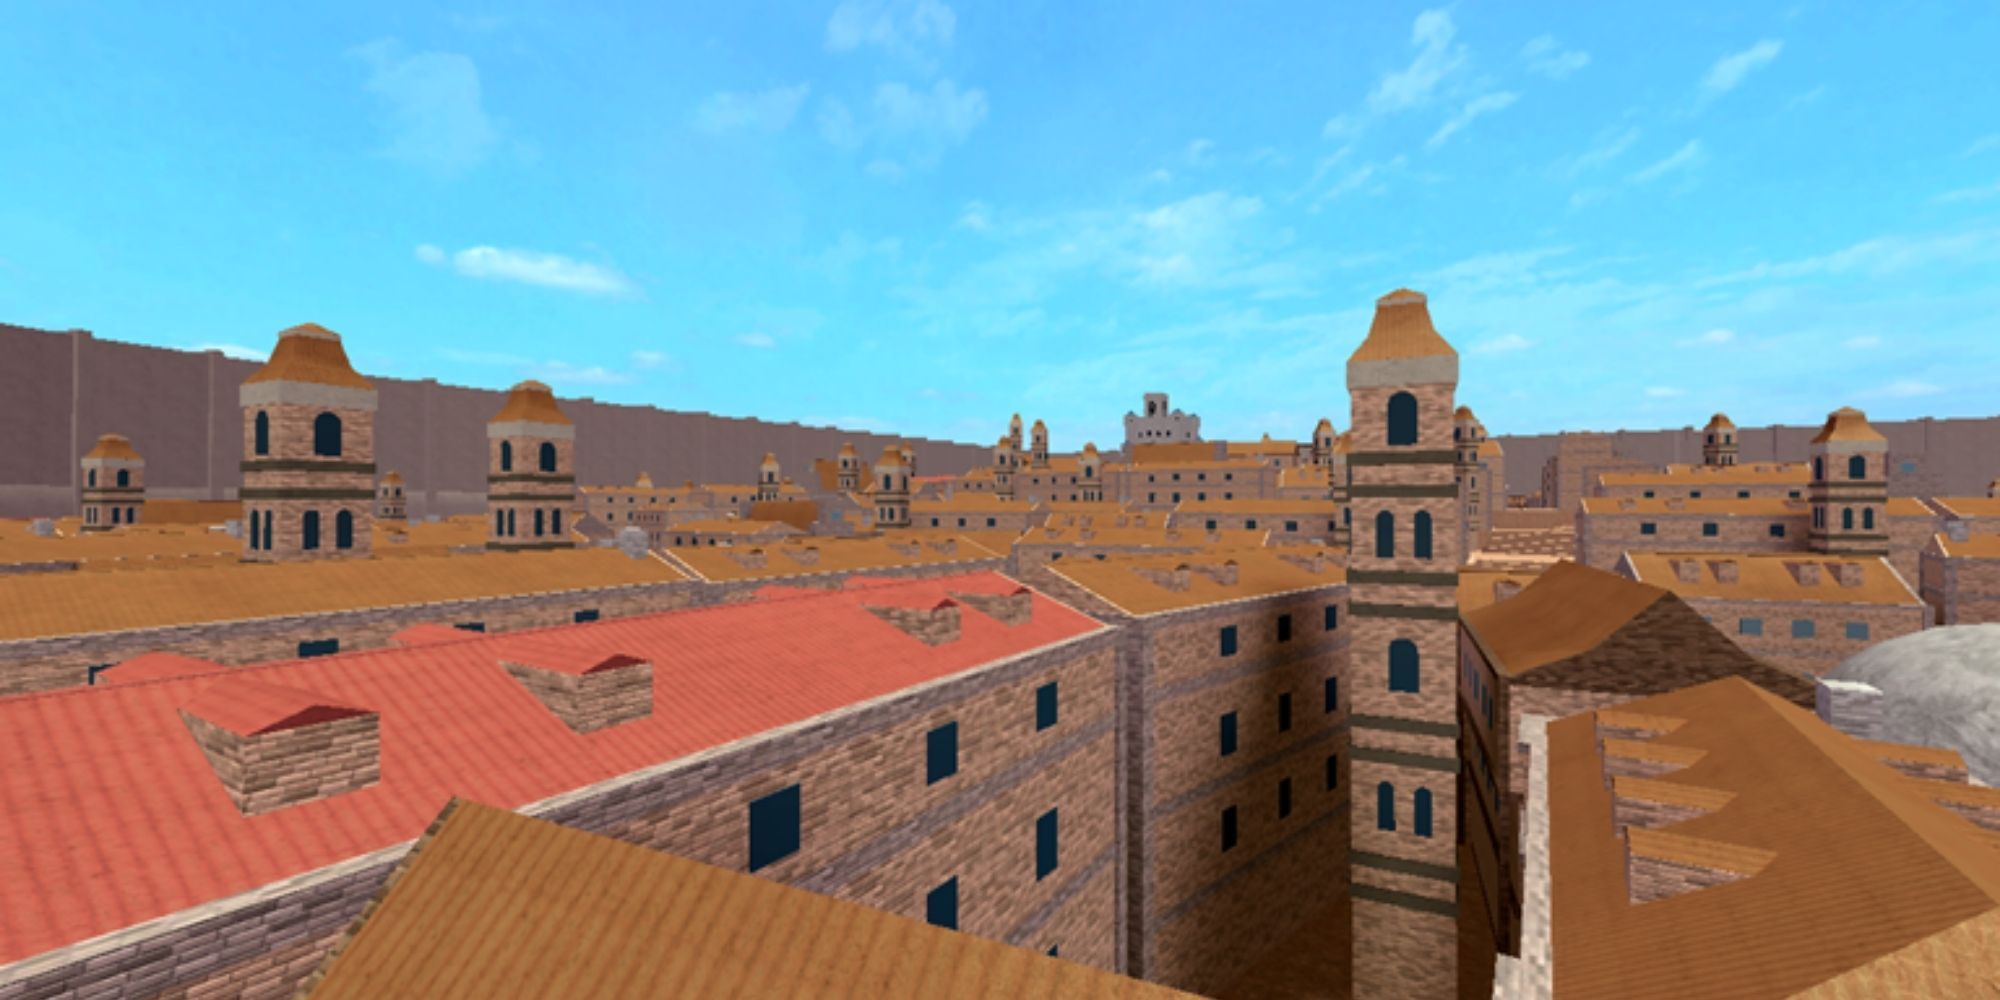 Still image of a city's terraced houses from Roblox game Downfall Sandbox.